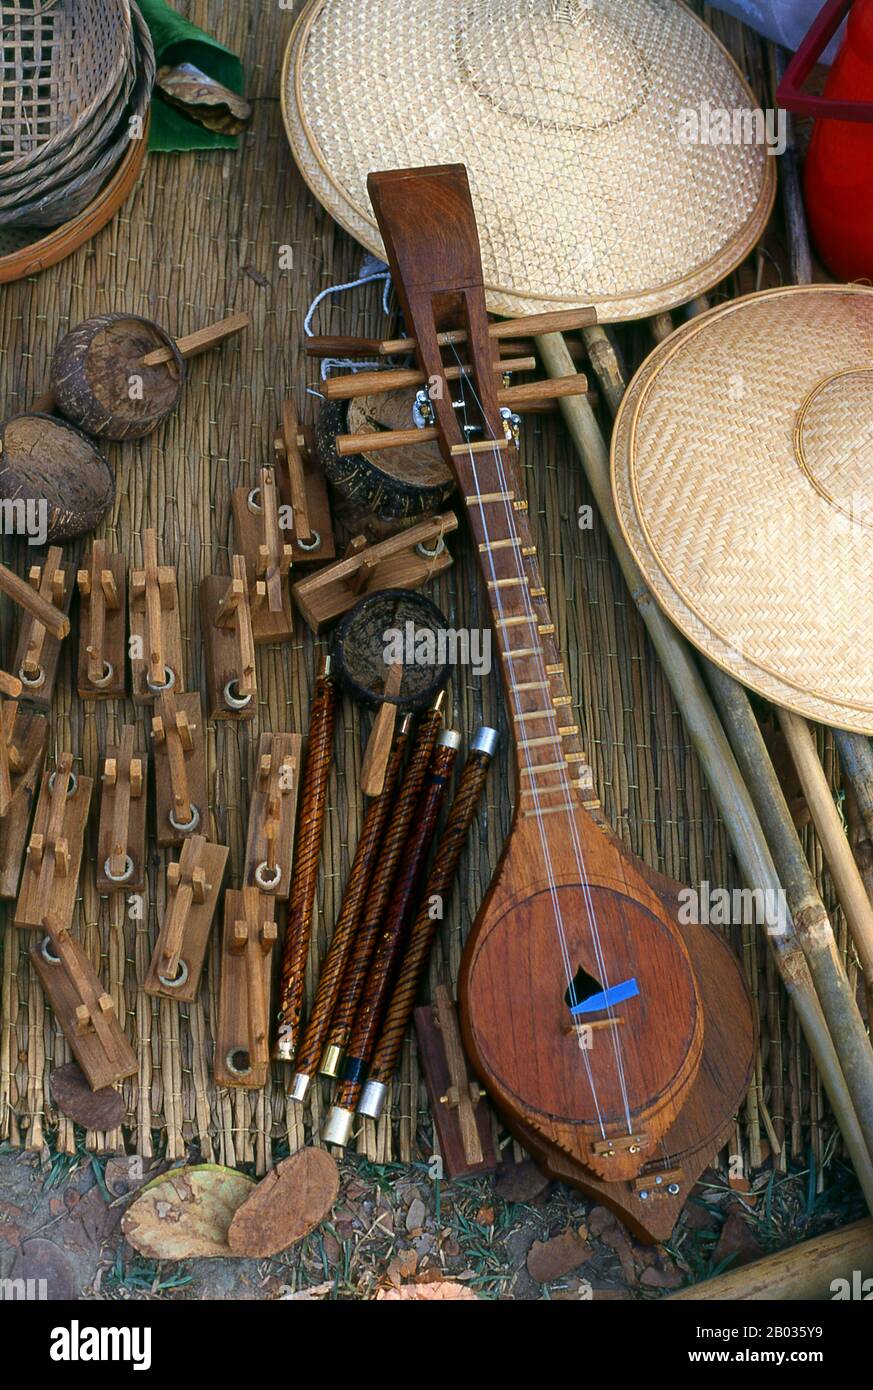 The sueng (also spelled seung or süng) is a plucked fretted lute from the northern region of Thailand. The instrument is made from hardwood and its strings (numbering either four or six and arranged in courses of two) are most often made of steel wire. It has nine bamboo frets.  The sueng is part of a northern Thai traditional ensemble called the salo-so (saw)-sueng ensemble, along with the salo (3-string spike fiddle) and pi so (free reed pipe). Stock Photo